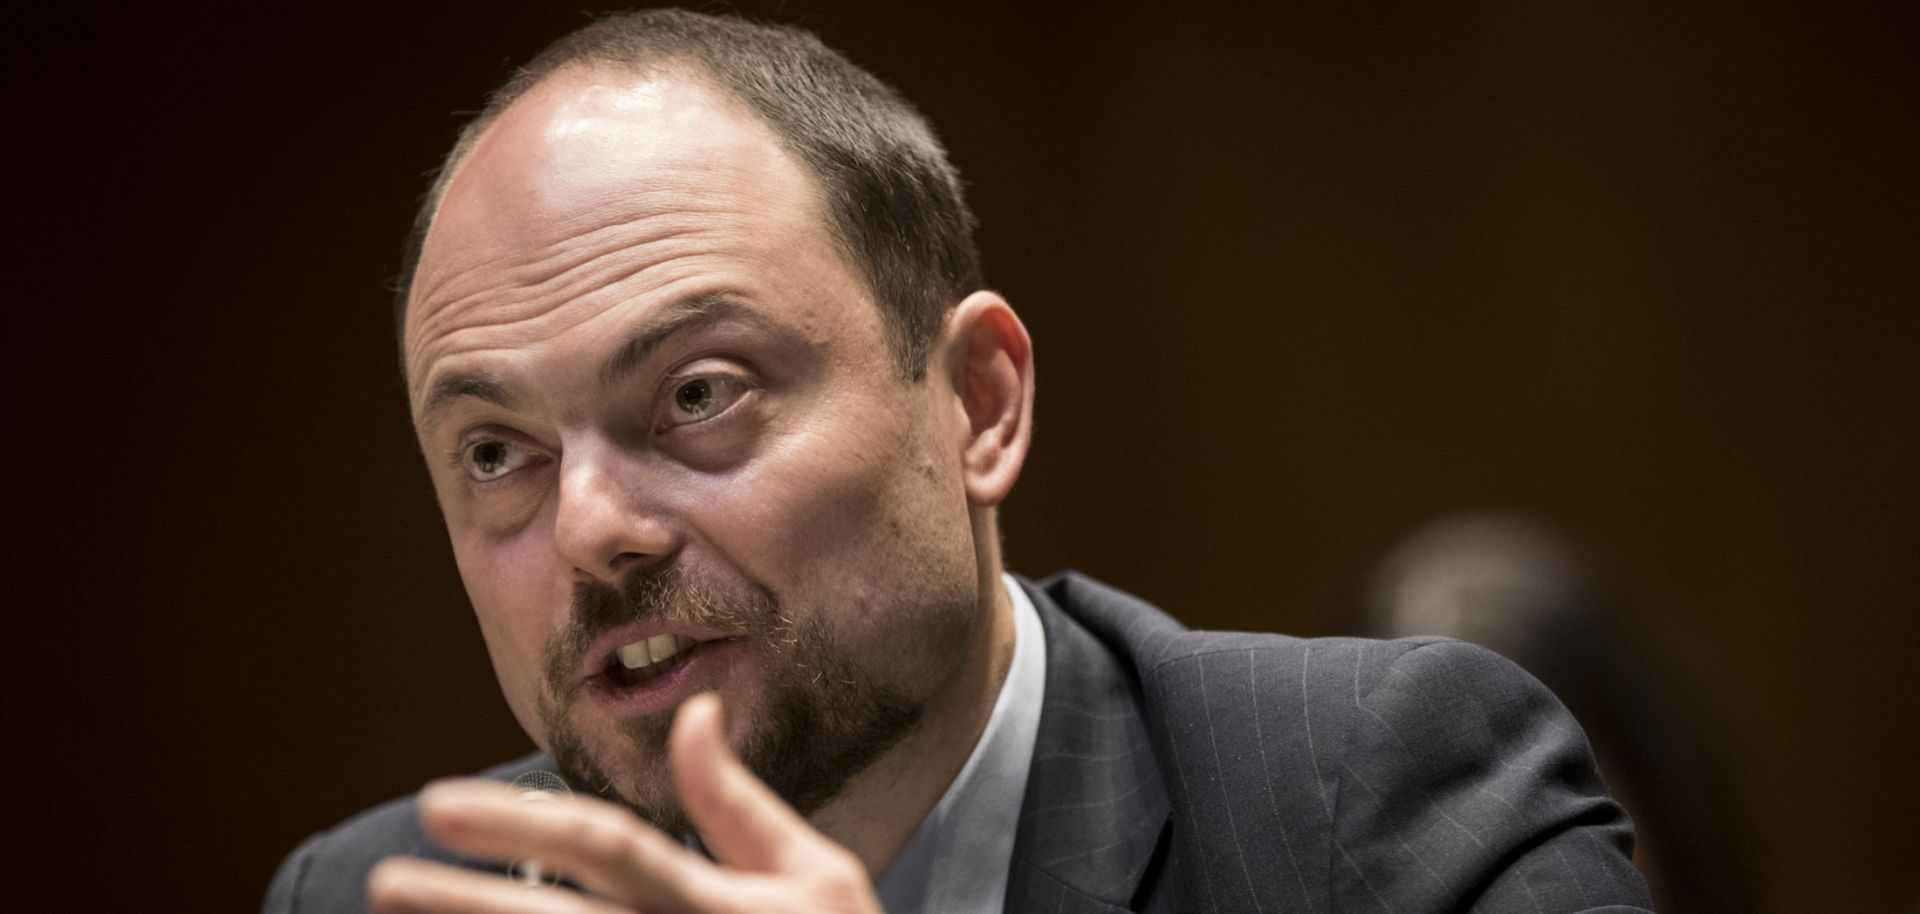 Vladimir Kara-Murza discusses the legacy of Russian opposition leader Boris Nemtsov during a hearing of the Commission on Security and Cooperation in Europe on Feb. 28 in Washington, D.C. Nemtsov was gunned down in Moscow in February 2015.